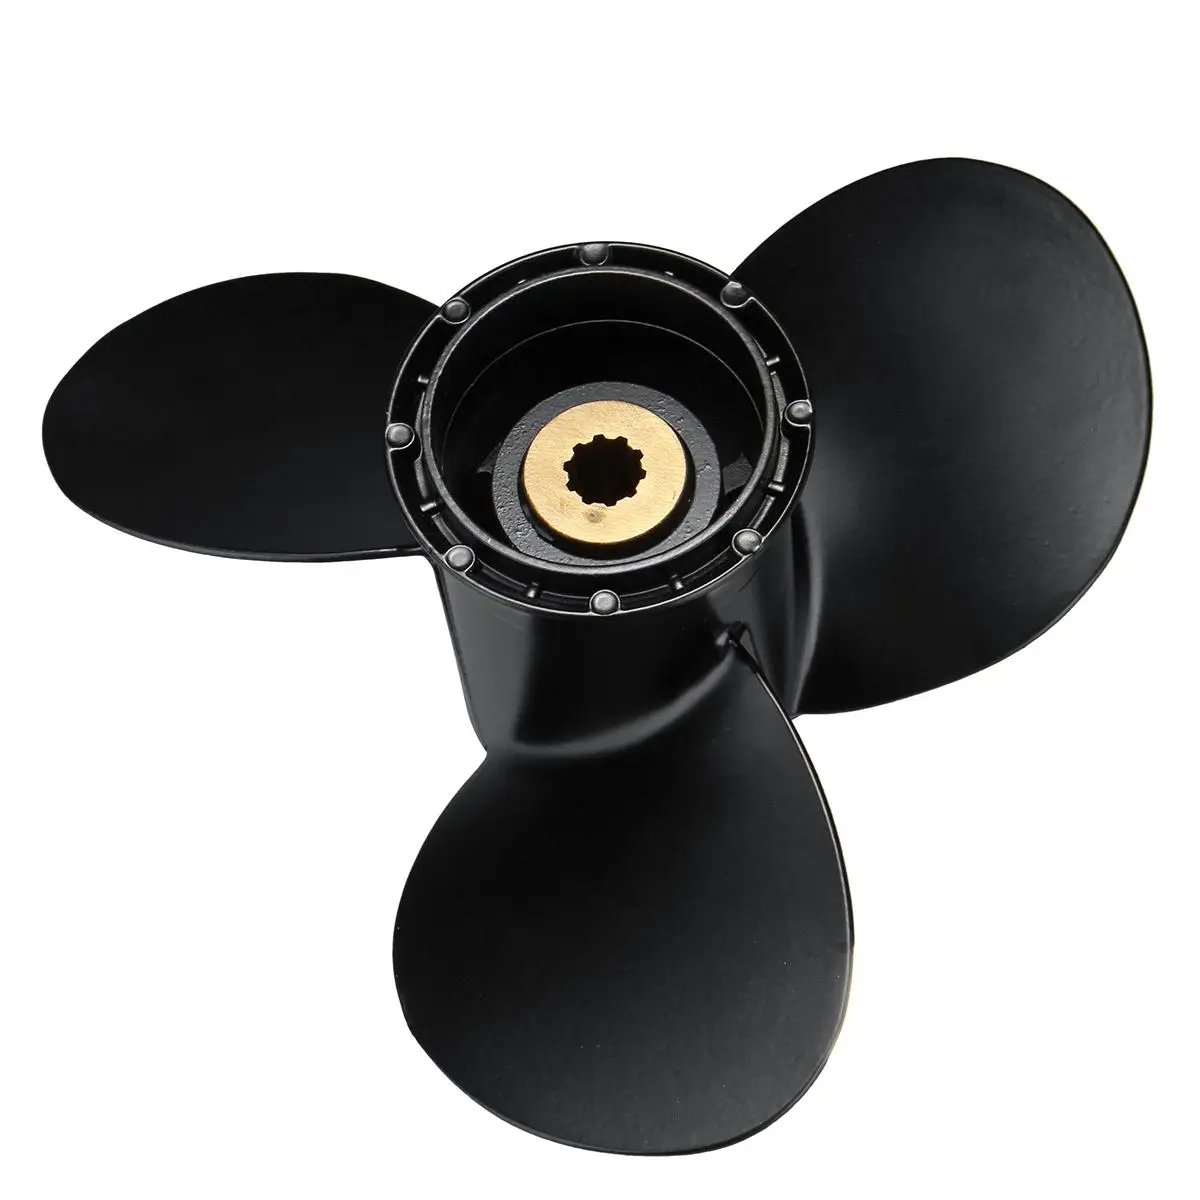 For Suzuki 15-20HP 9 1/4 x 10 Boat Propeller 58100-93733-019 Outboard Engine Propeller Aluminum Alloy 3 Blades